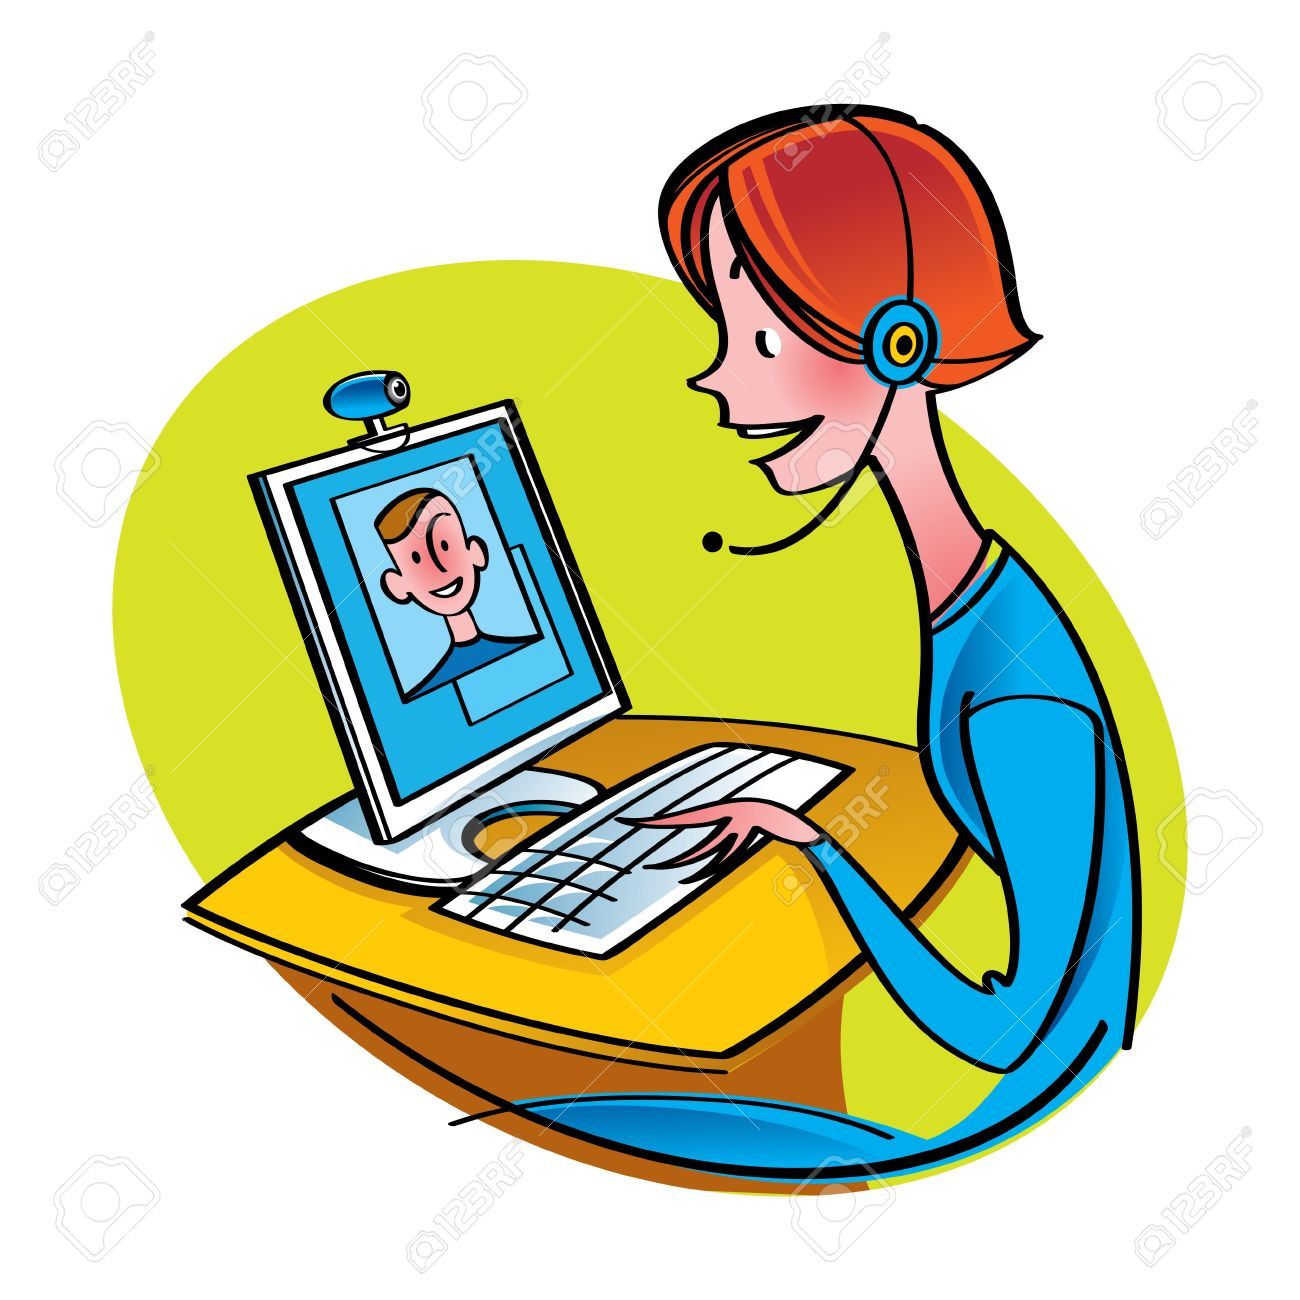 Chatting online clipart